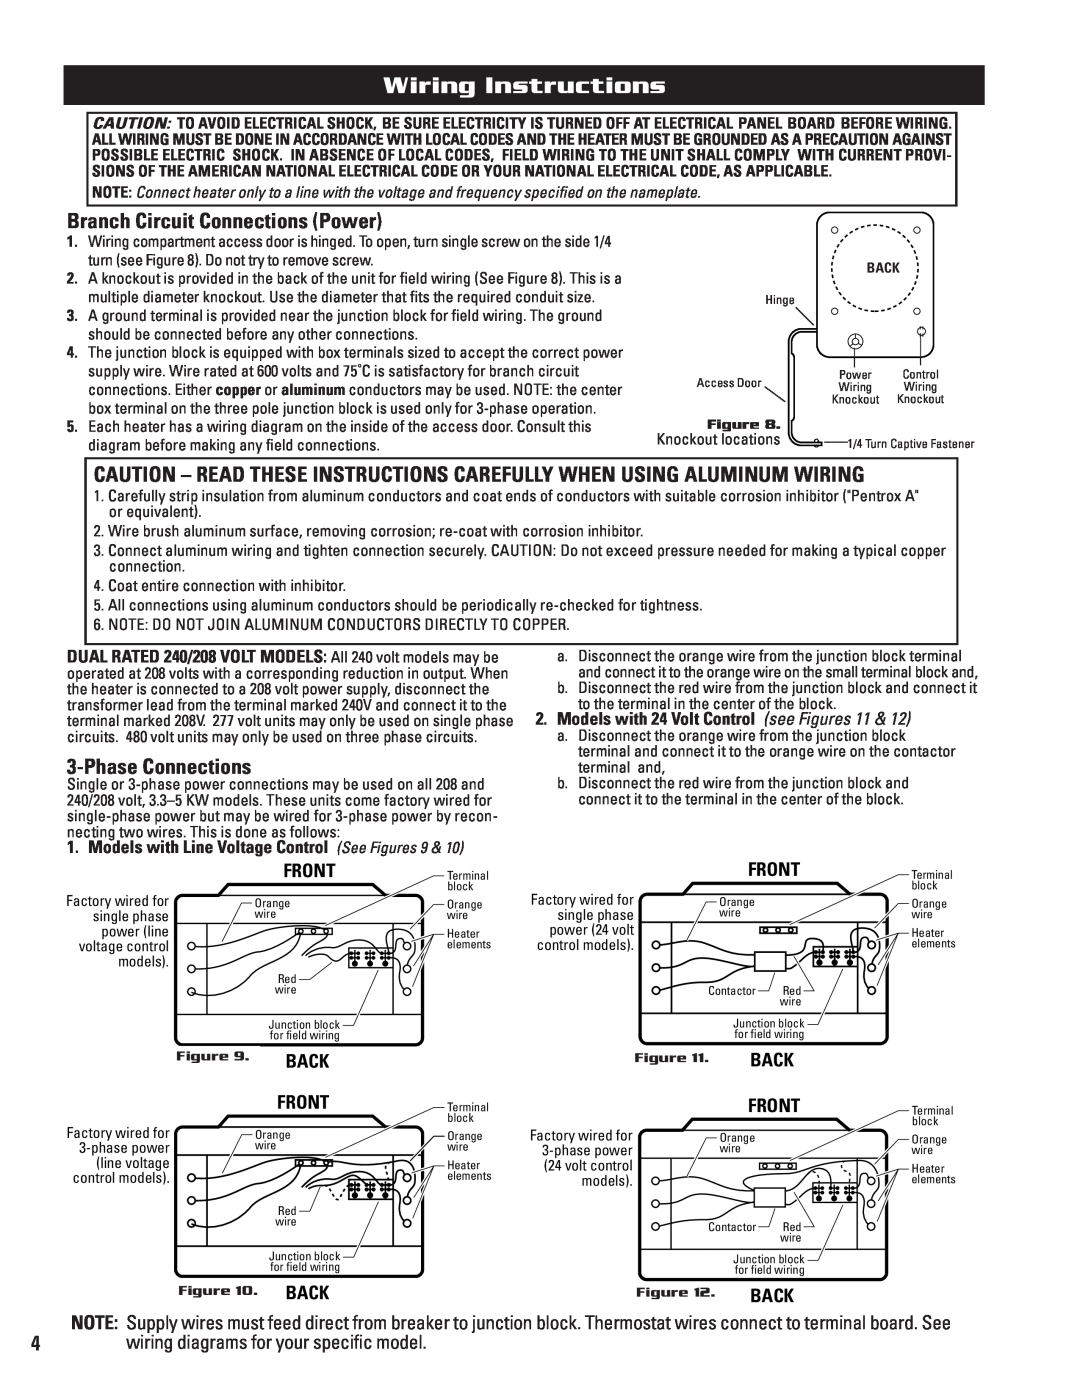 Cadet CEH-005PB, CEH-005MB, CEH-003R warranty Wiring Instructions, Branch Circuit Connections Power, Phase Connections, Front 